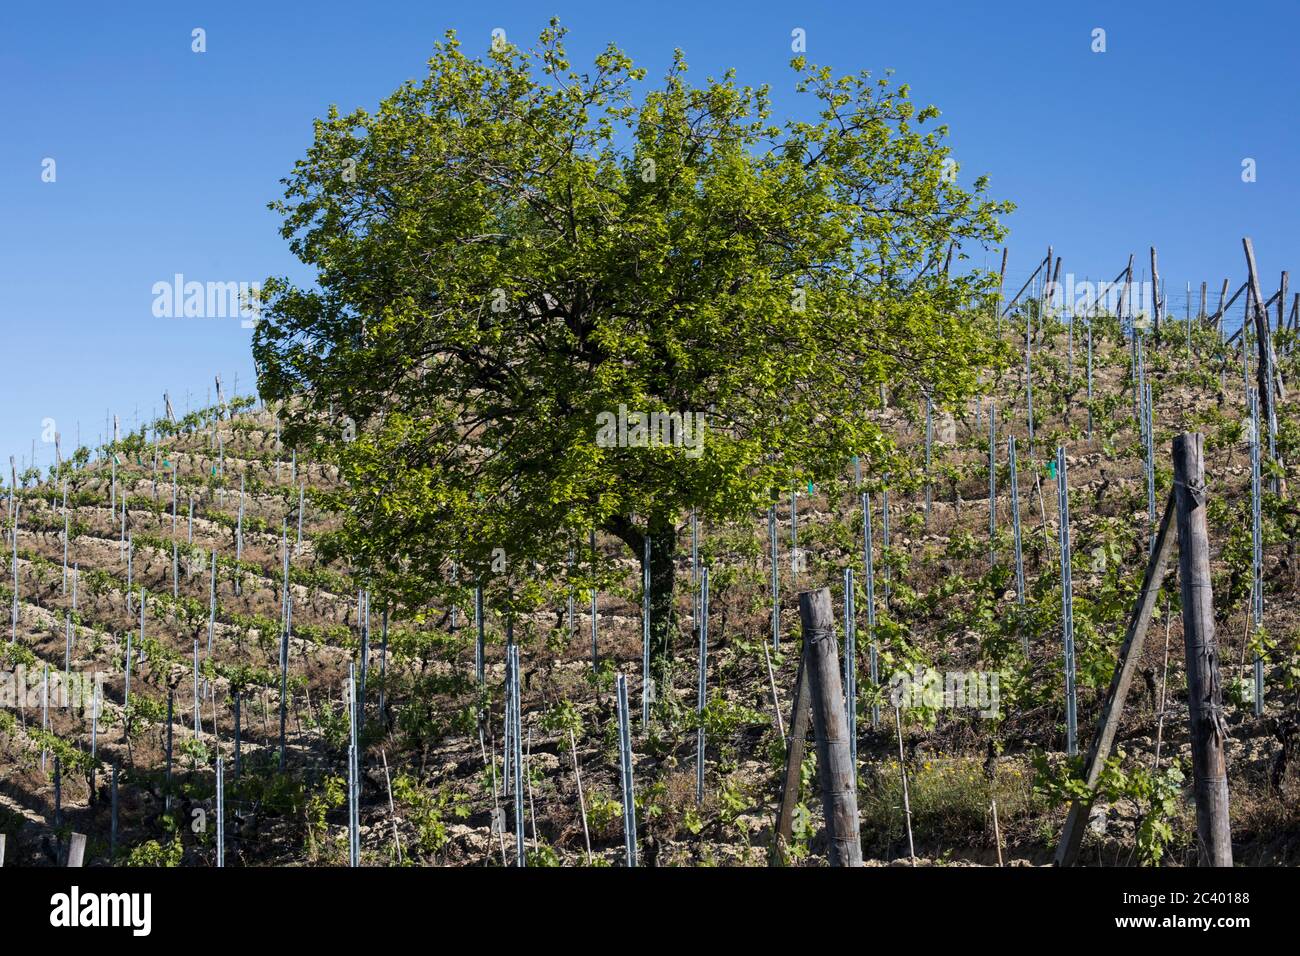 A tree in a vineyard near Sessame, Piedmont, Italy Stock Photo